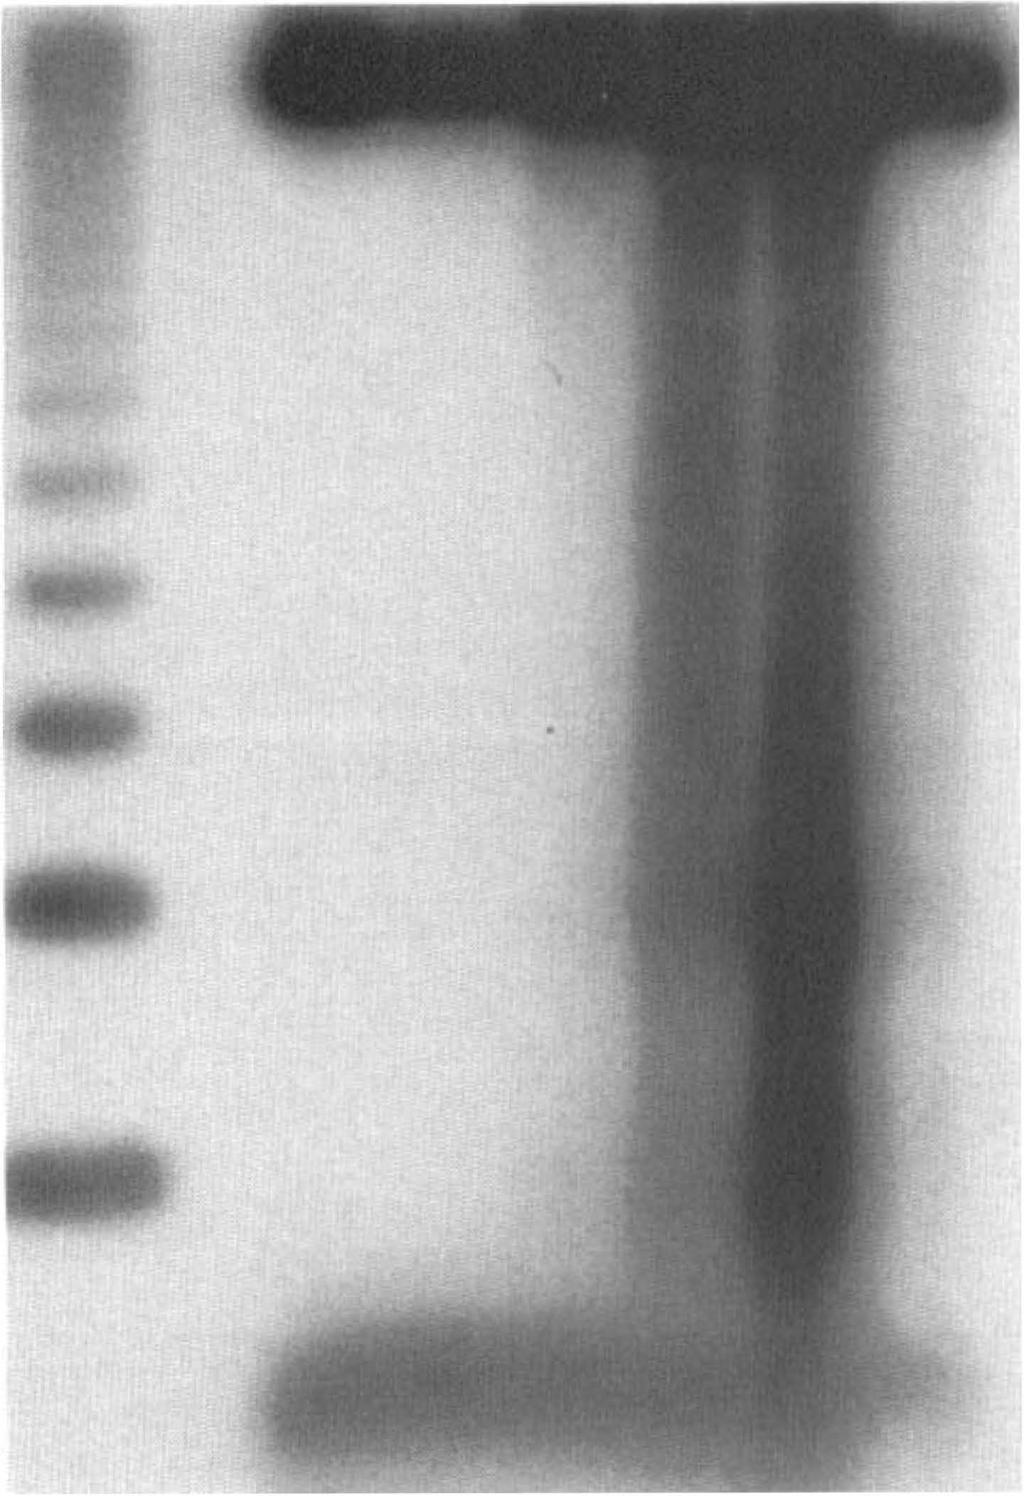 DNA was isolated from ischemic striatal tissue after various times after reperlusion, end-labeled with [32P]ddATP, electrophoresed on a 2% agarose gel, and autoradiographed.